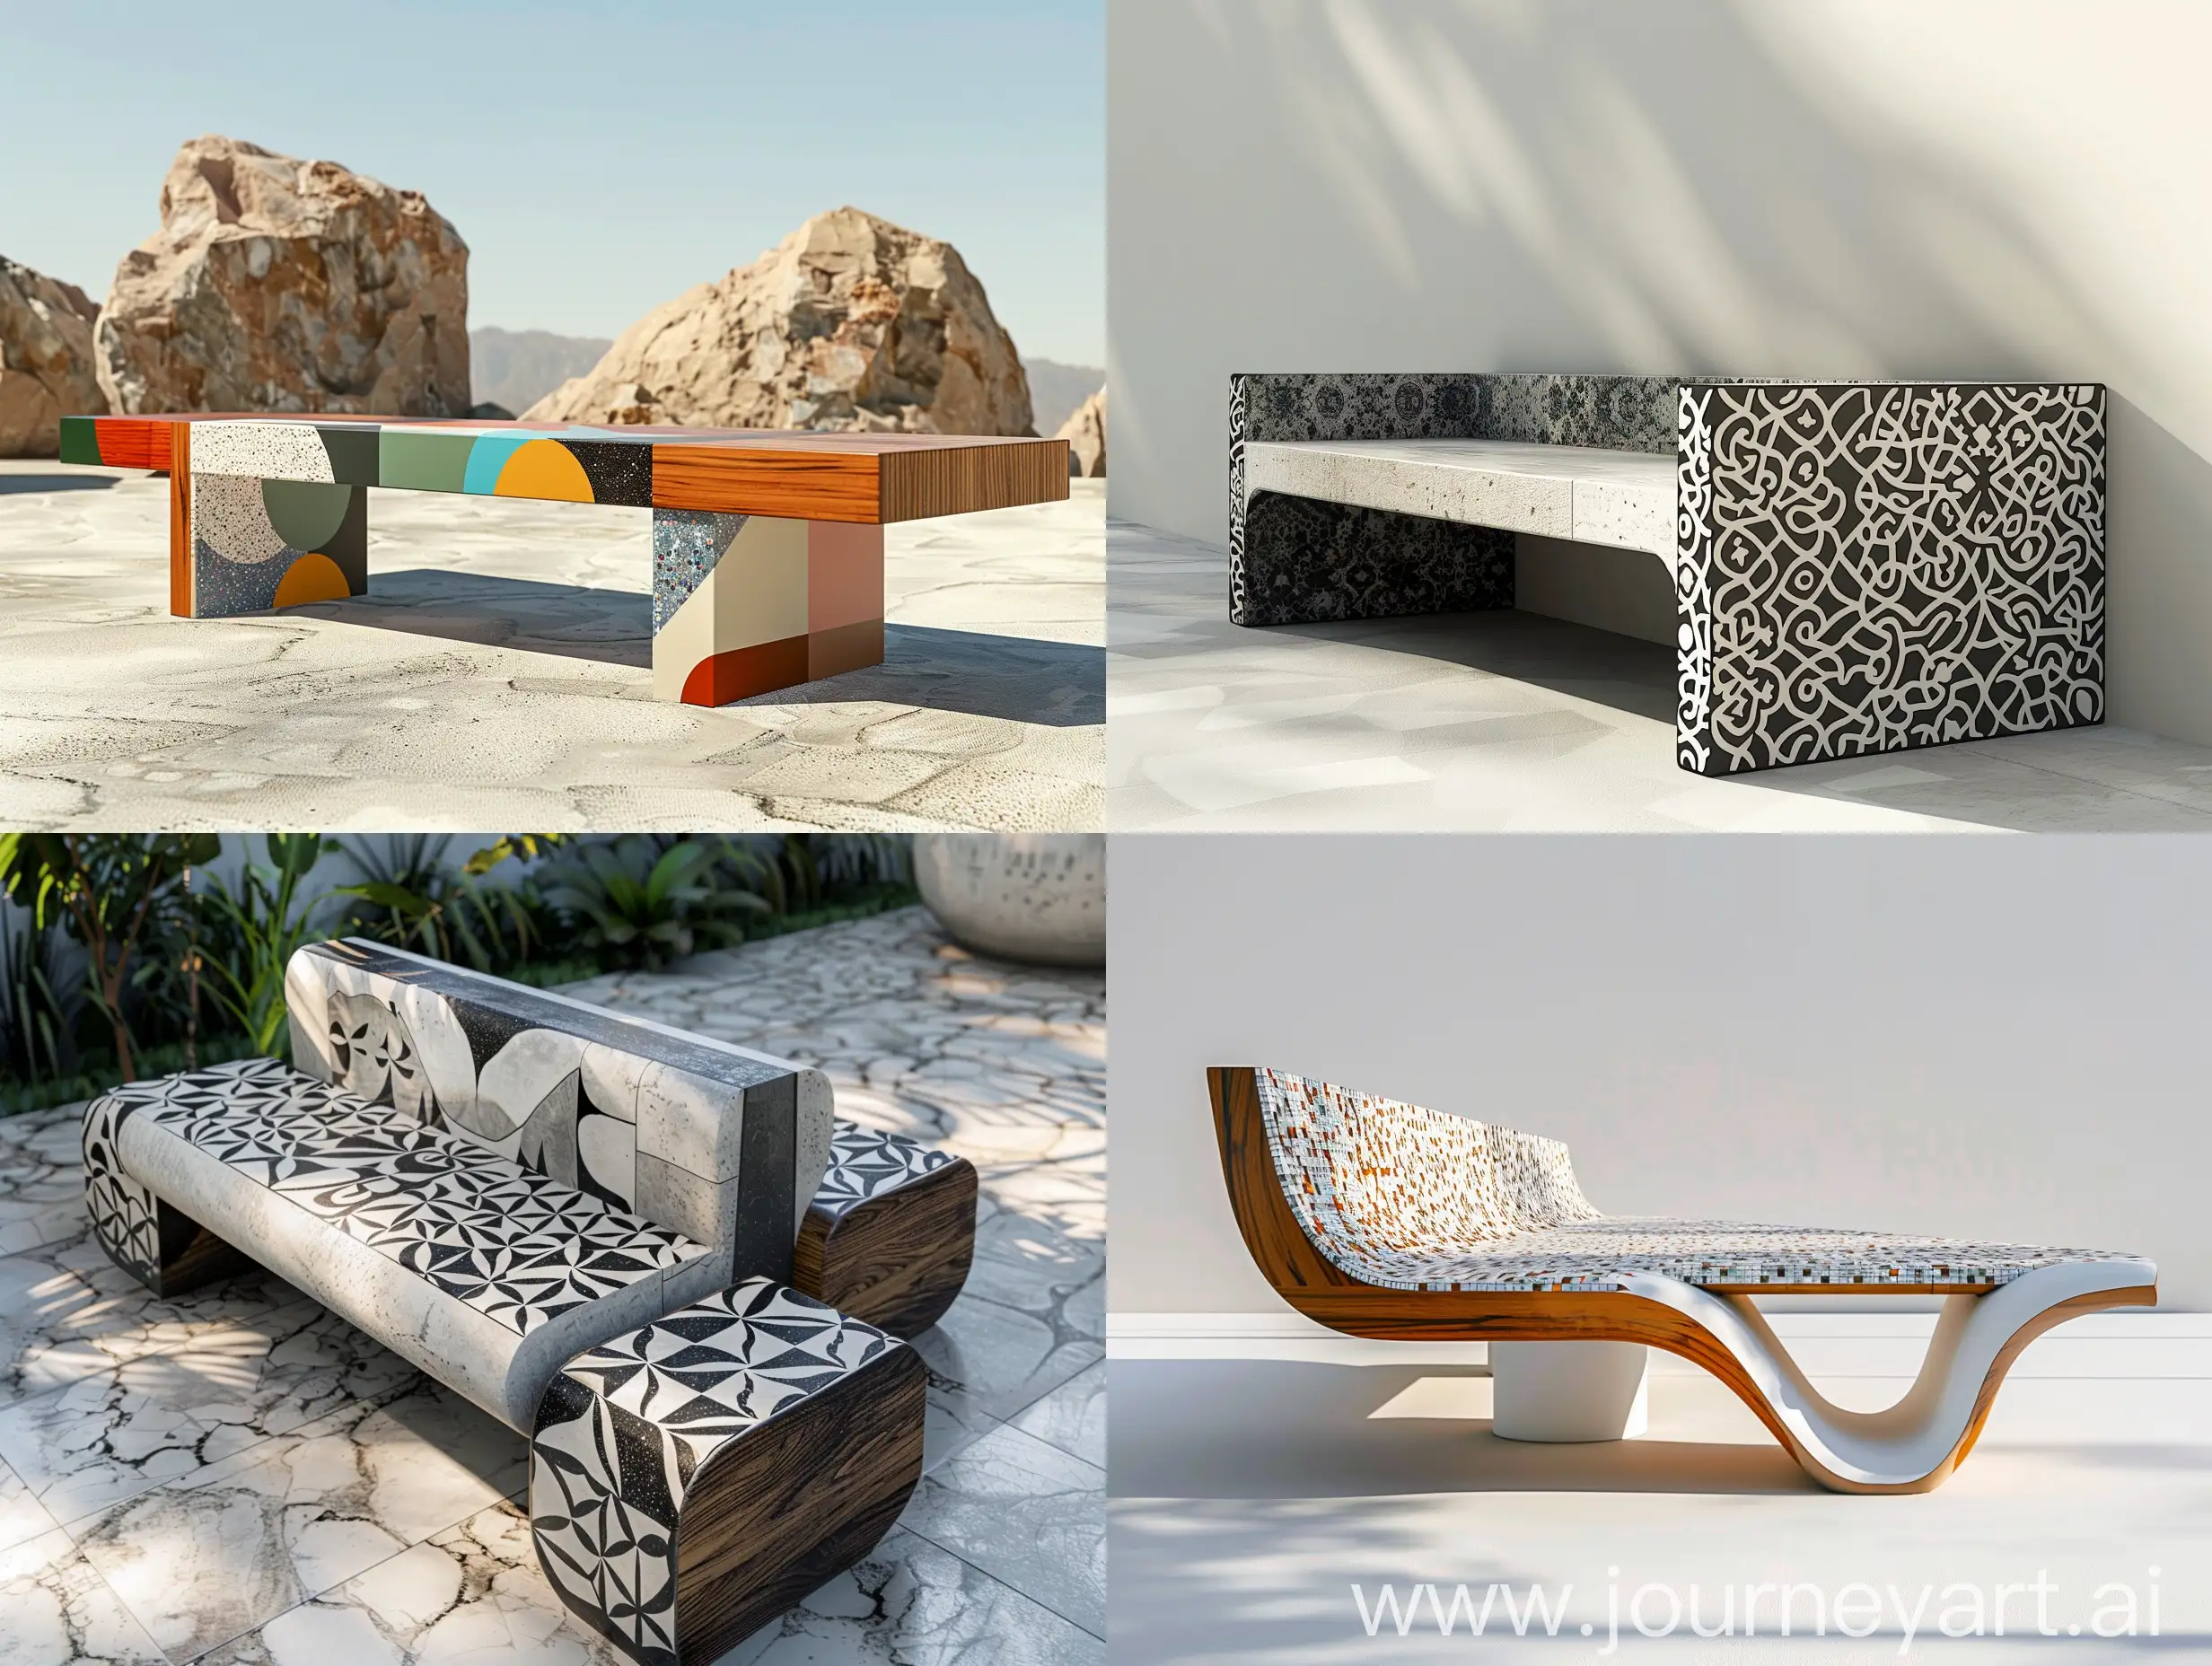 minimal and madern and modoular outdoor bench inspired of persian art with bauhaus graphic design style